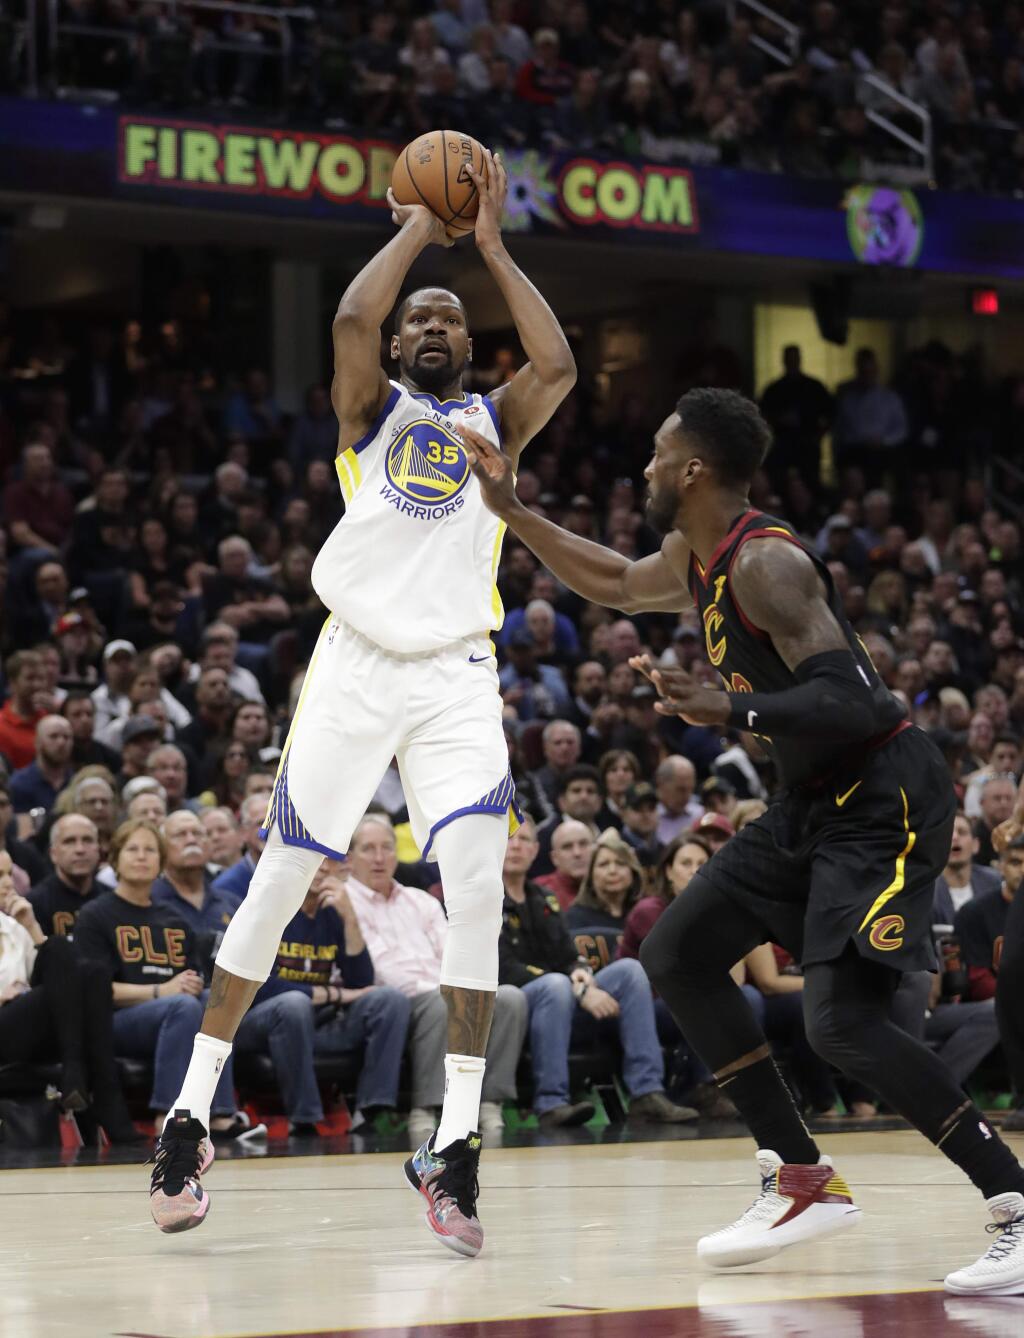 Golden State Warriors' Kevin Durant shoots against Cleveland Cavaliers' Jeff Green during the first half of Game 3 of basketball's NBA Finals, Wednesday, June 6, 2018, in Cleveland. (AP Photo/Tony Dejak)